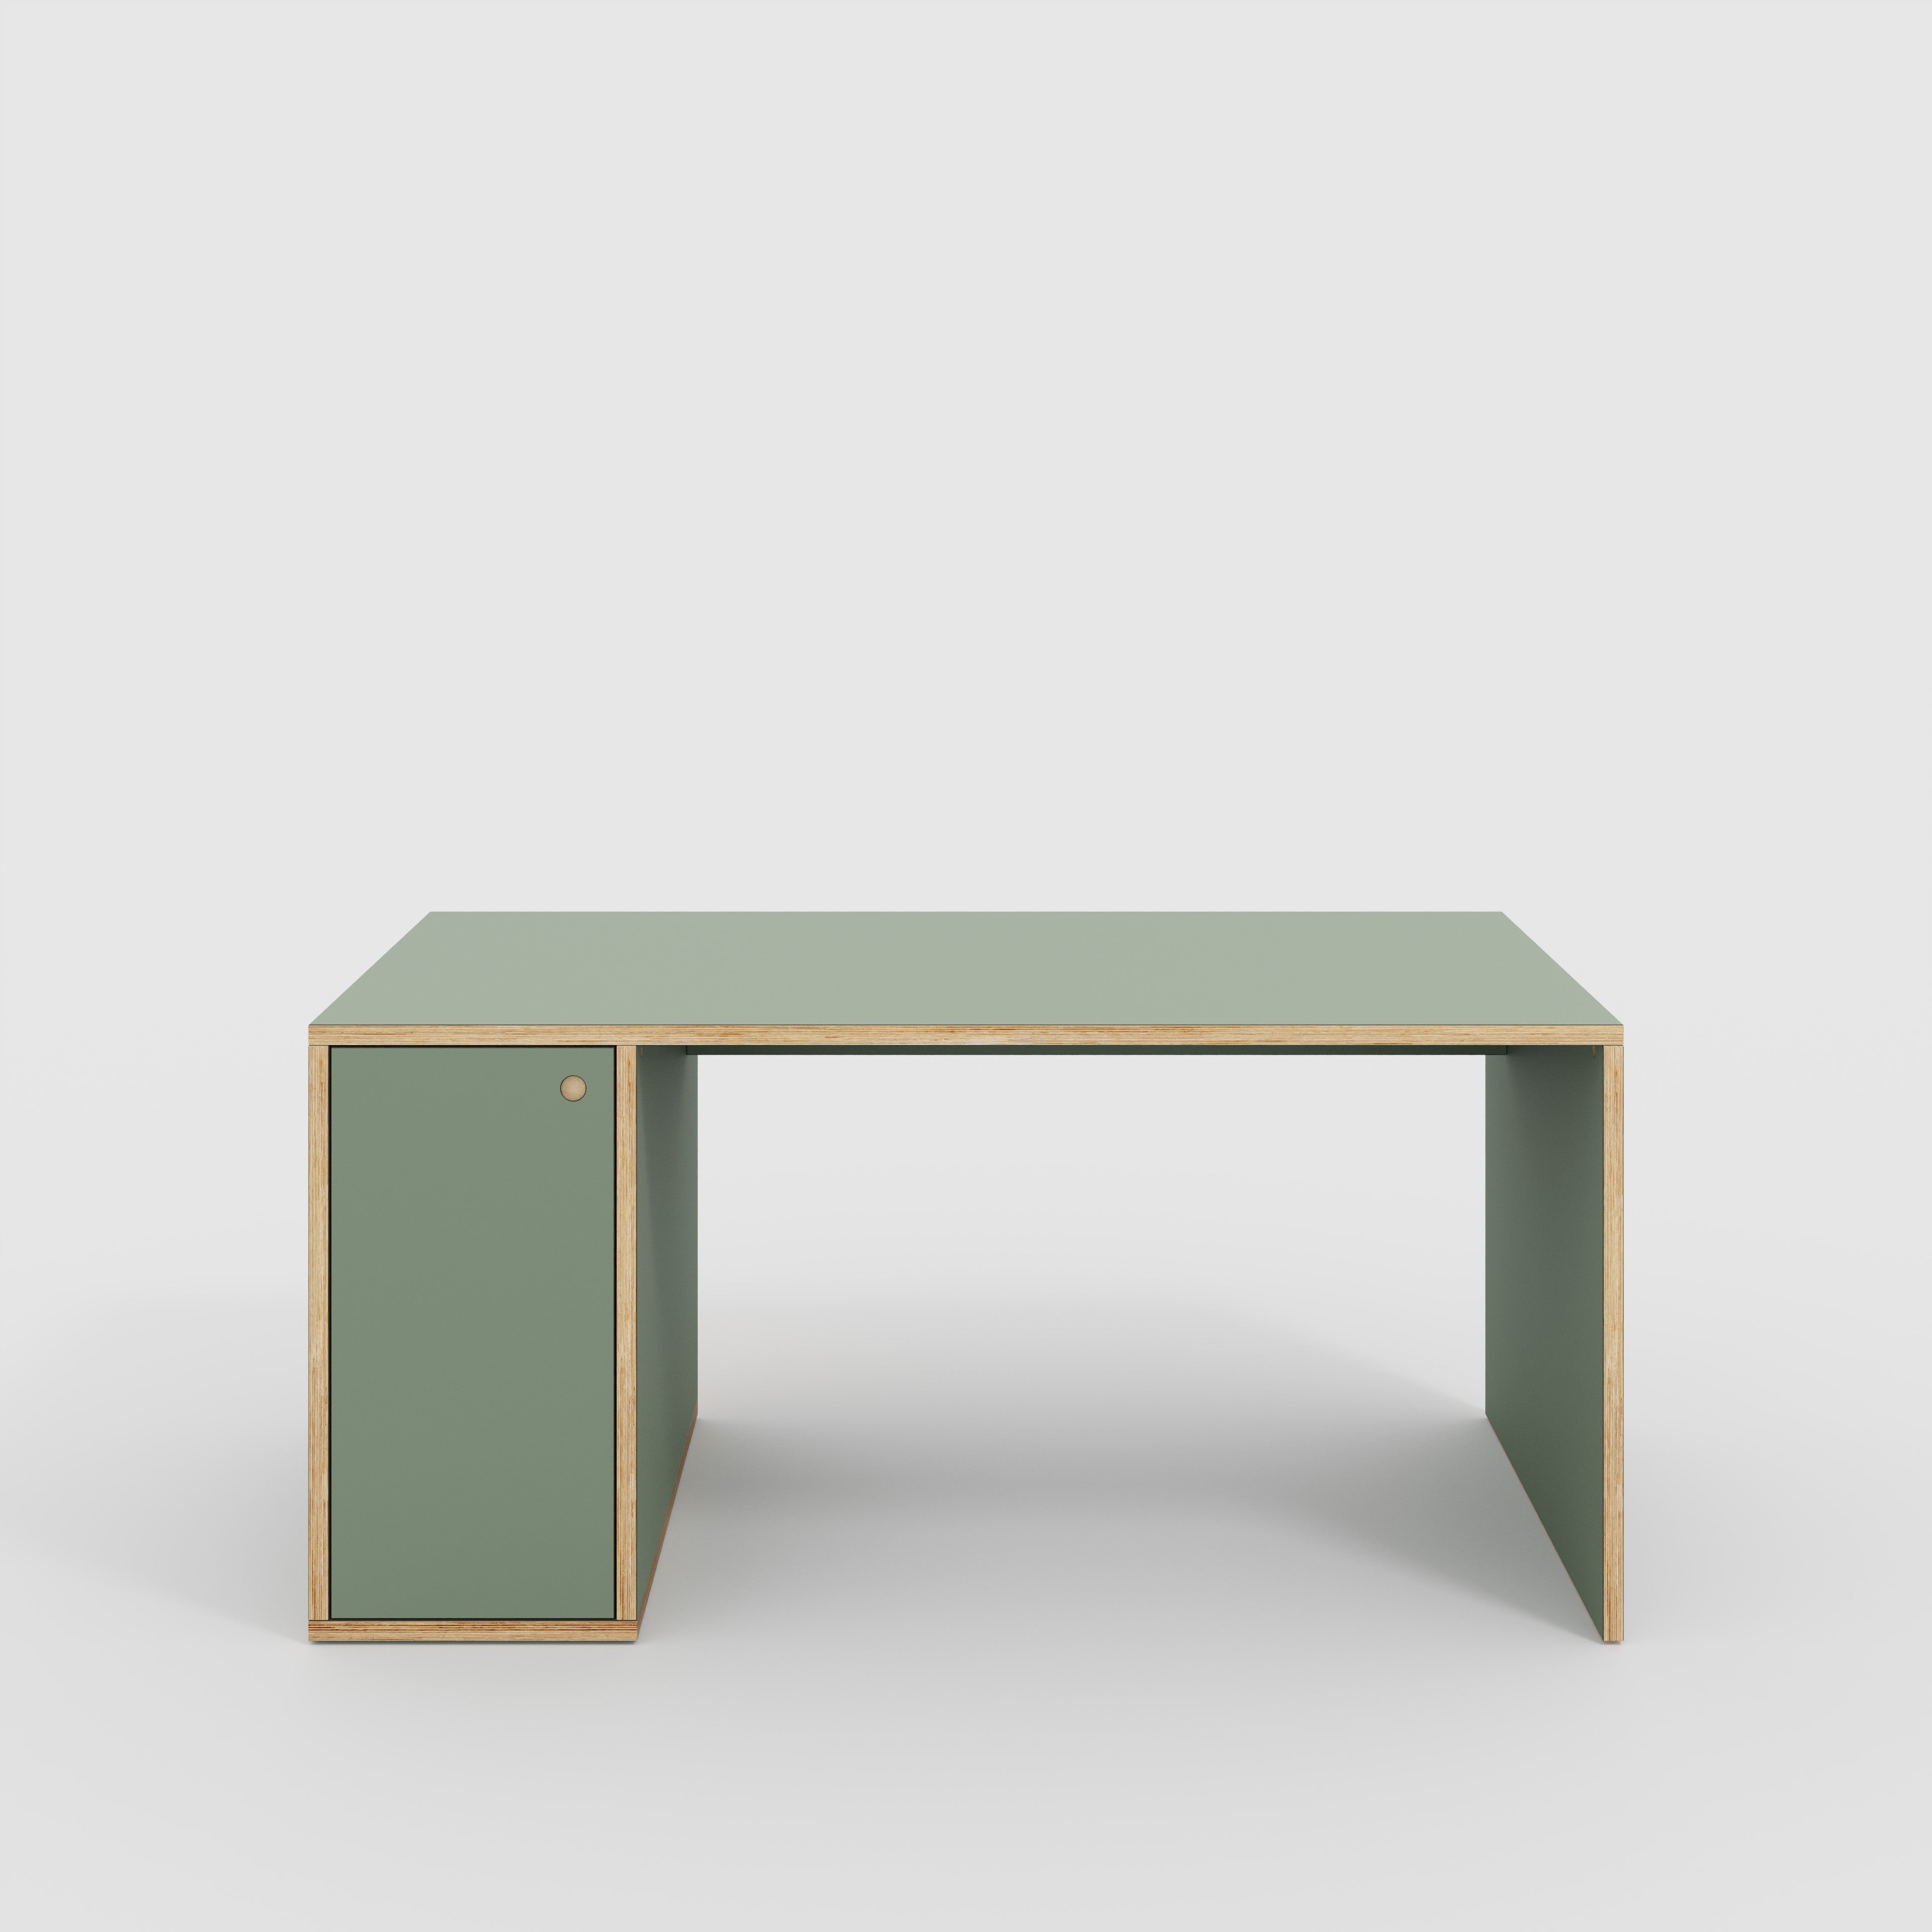 Desk with Storage Type 1 LH - Door - Formica Green Slate - 1600(w) x 800(d) x 750(h)